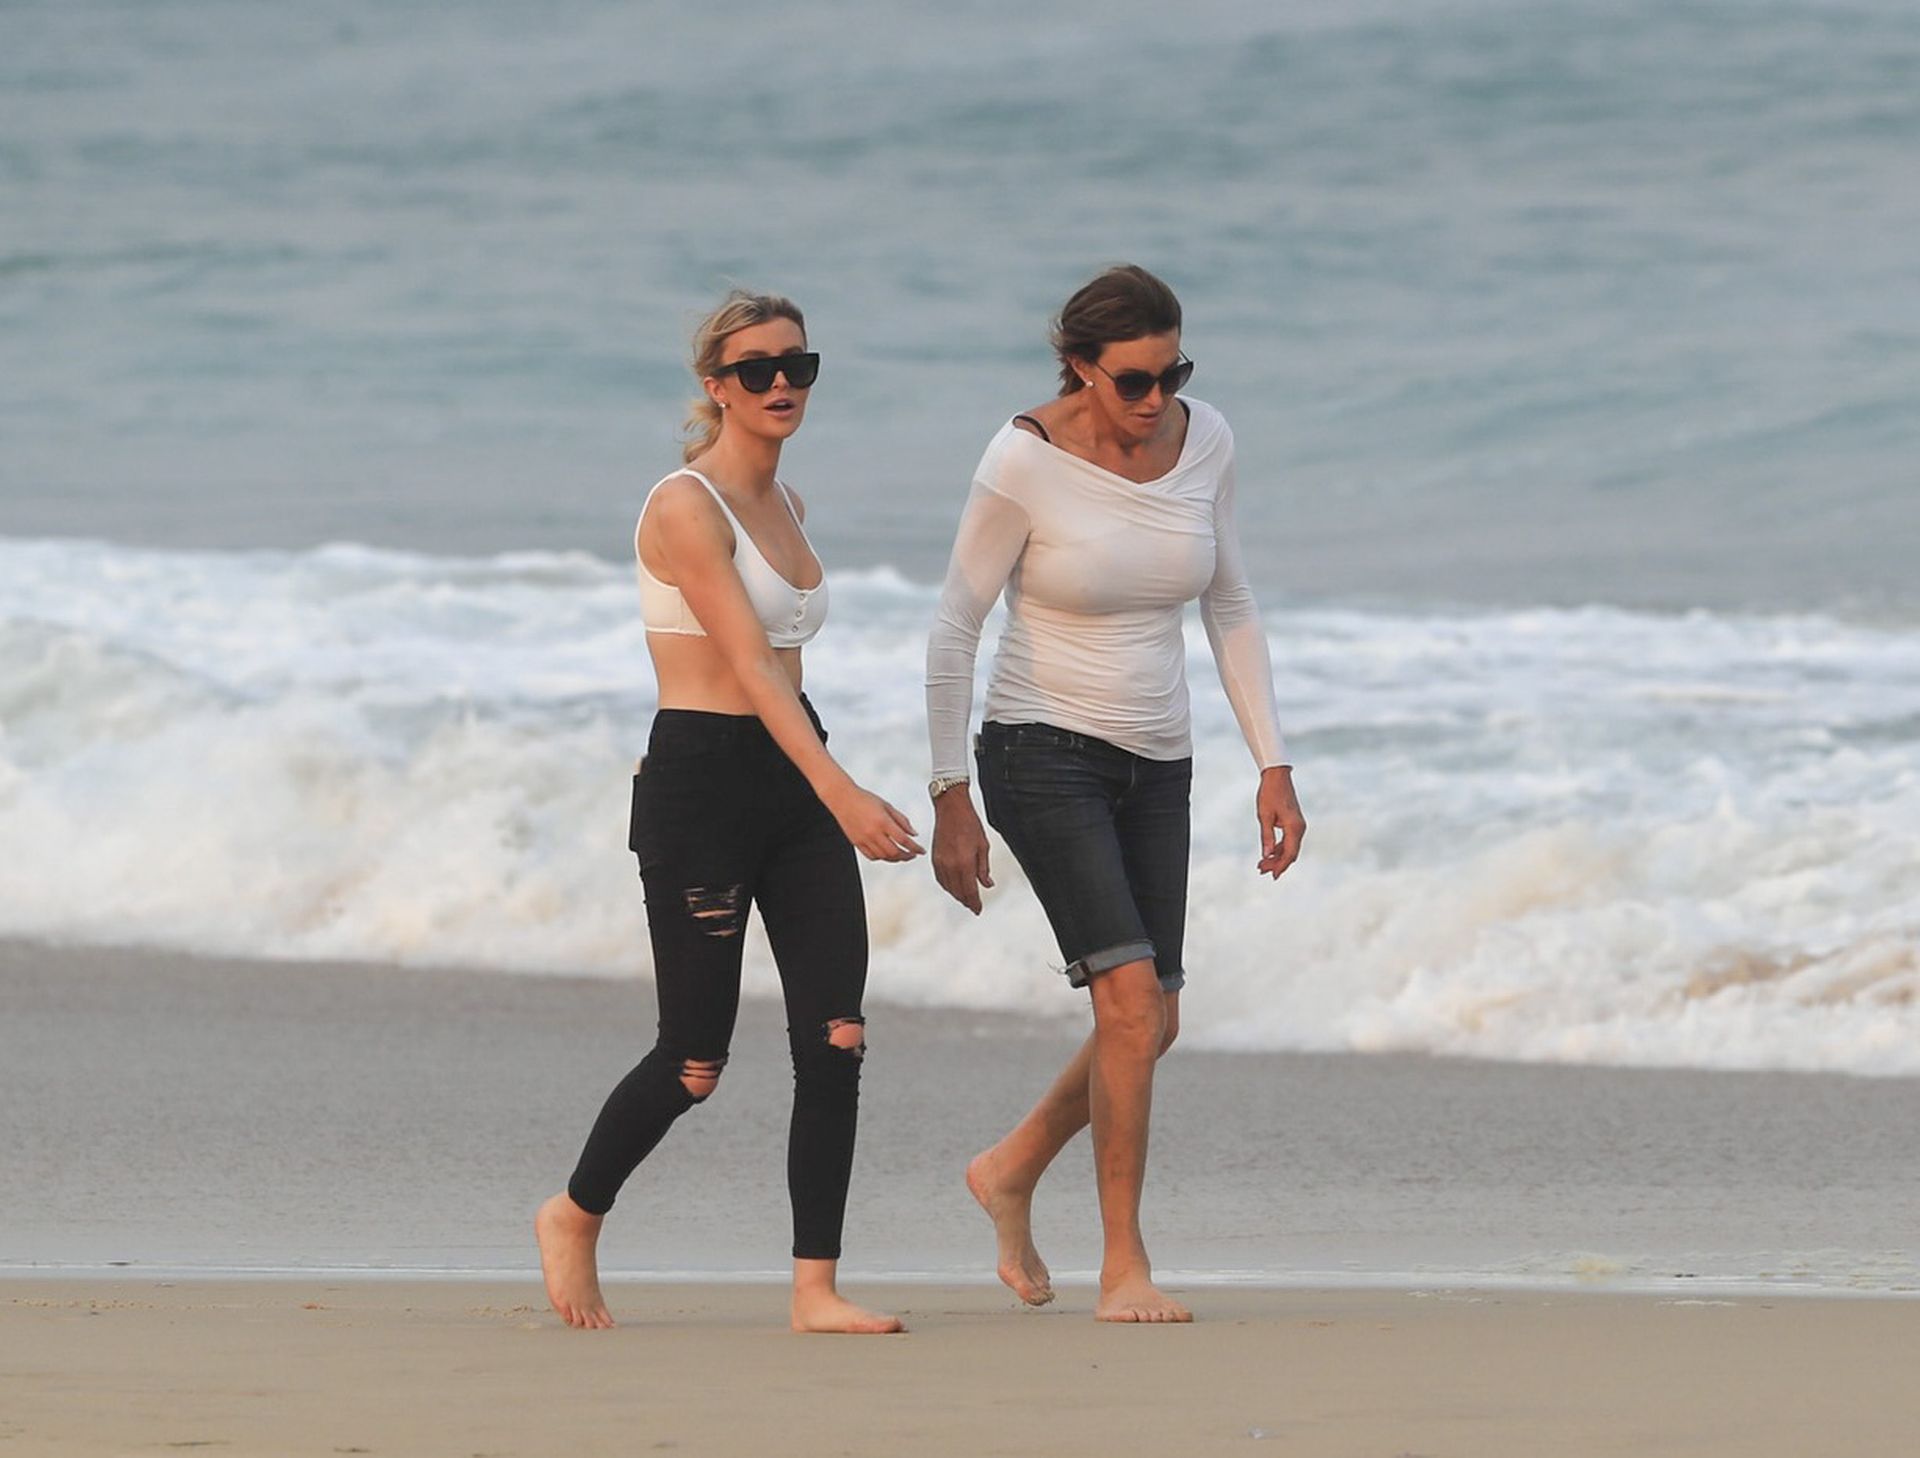 Braless Caitlyn Jenner, 68, flashes her nipples as she steps out with her  22-year-old rumored girlfriend Sophia Hutchins in Malibu (Photos)